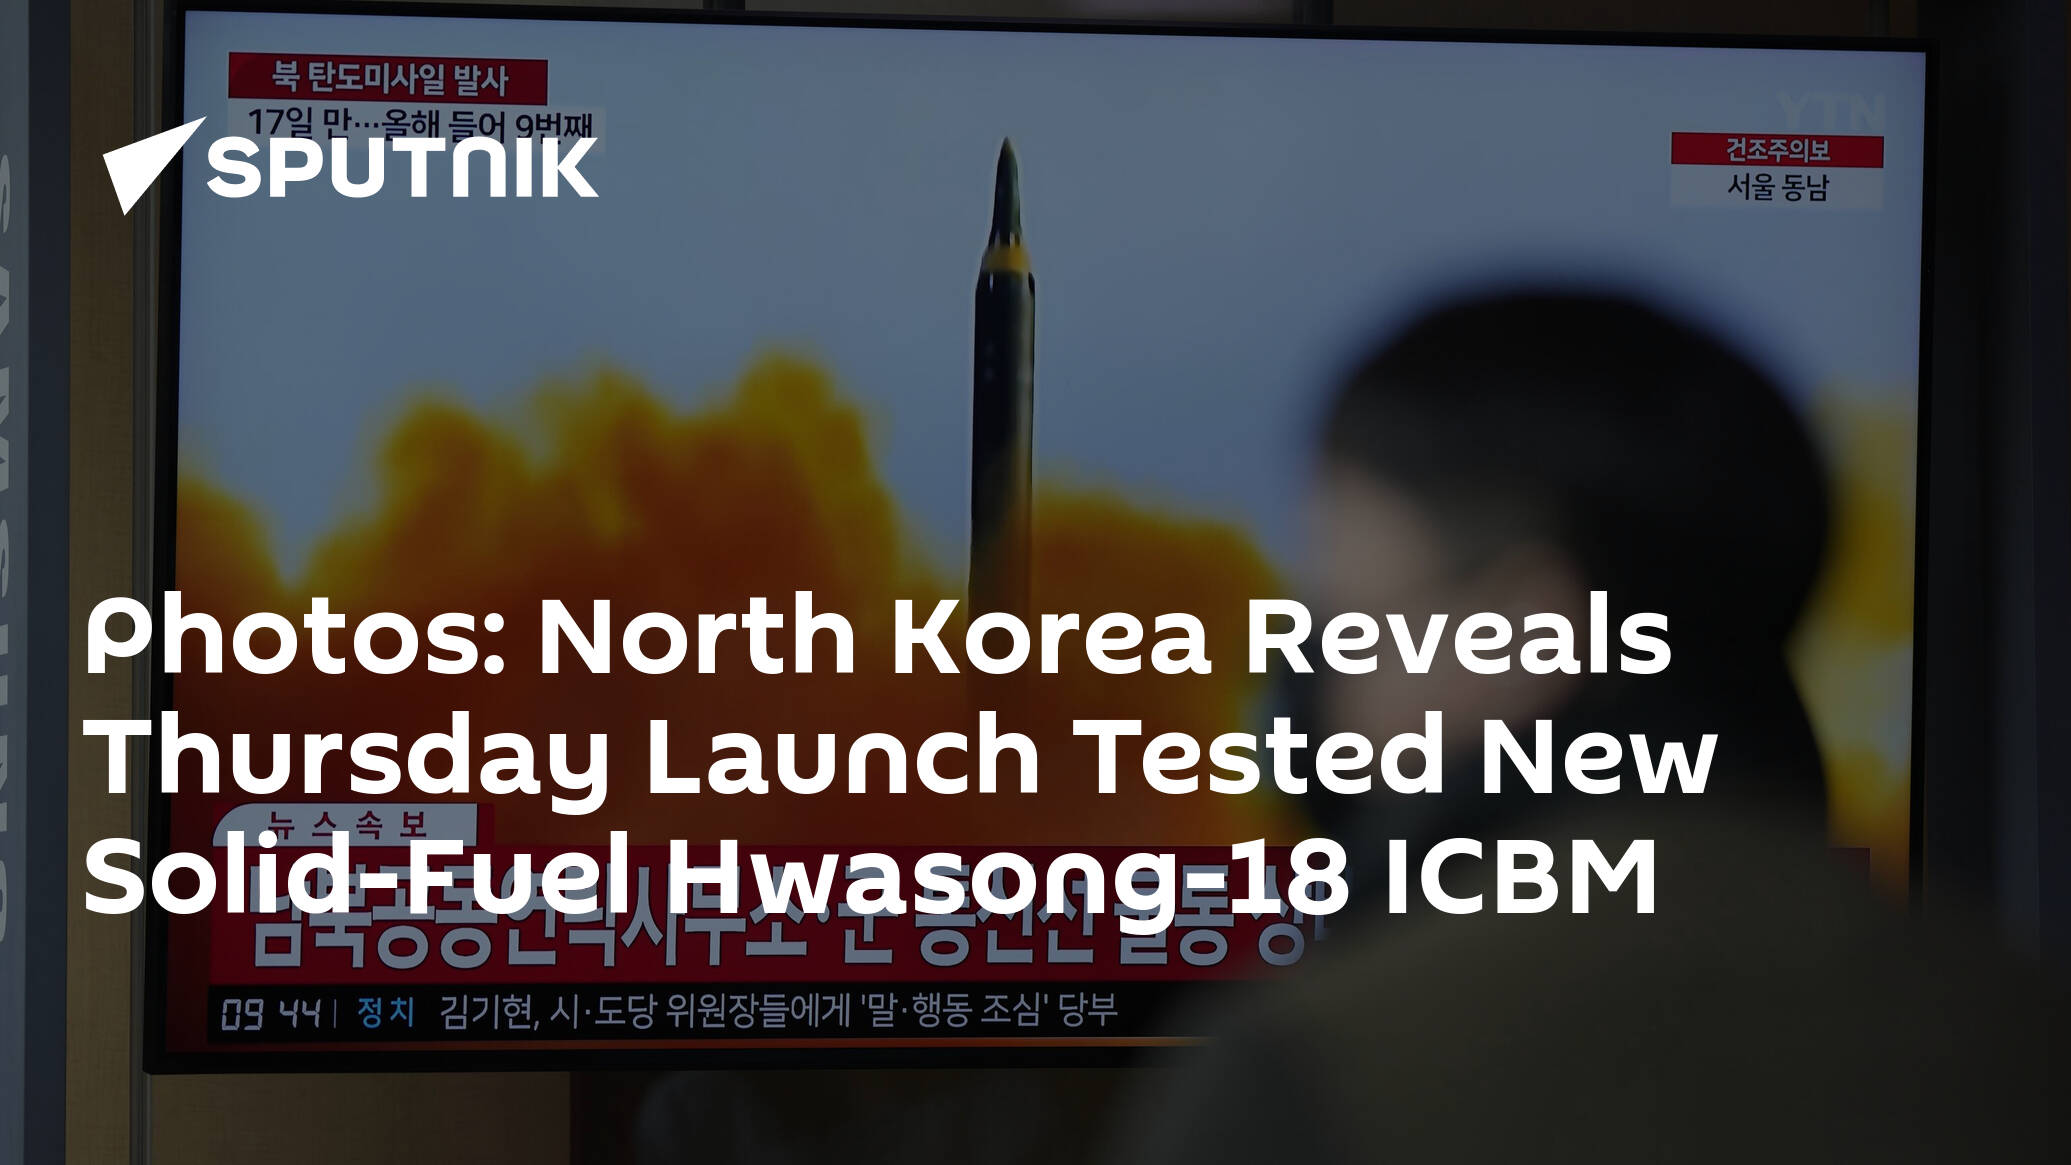 Photos: North Korea Reveals Thursday Launch Tested New Solid-Fuel Hwasong-18 ICBM